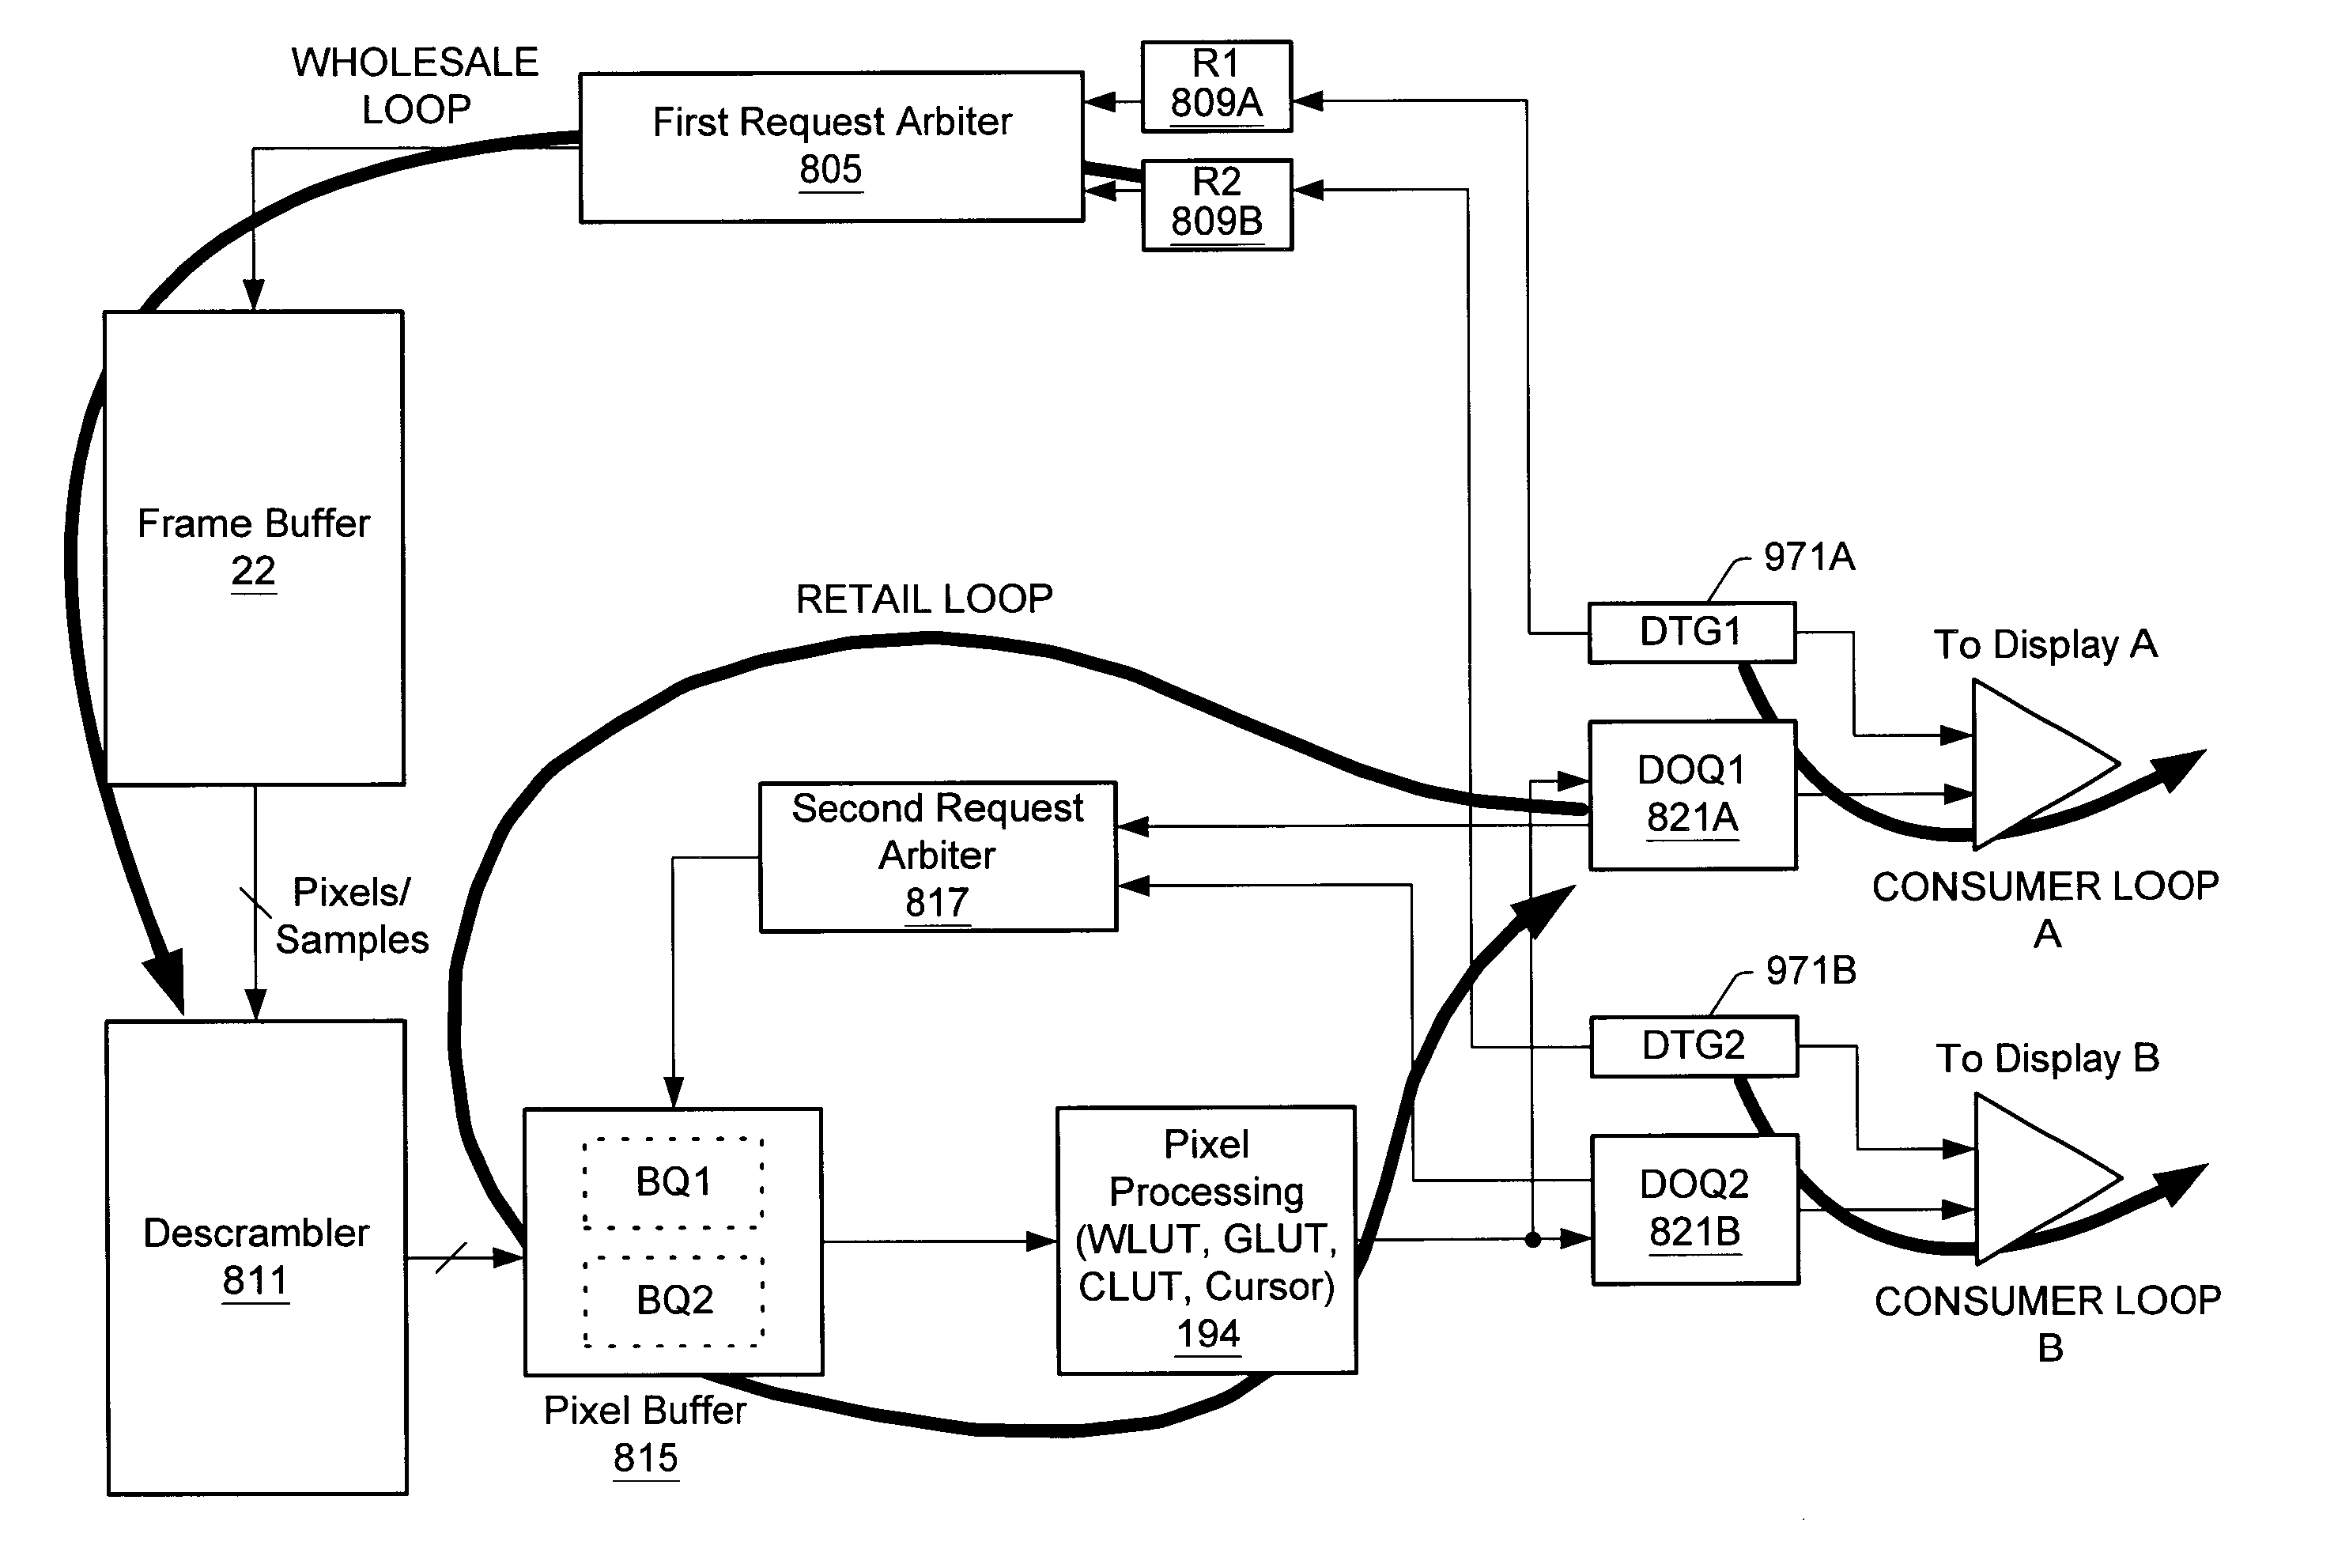 Multi-channel, demand-driven display controller